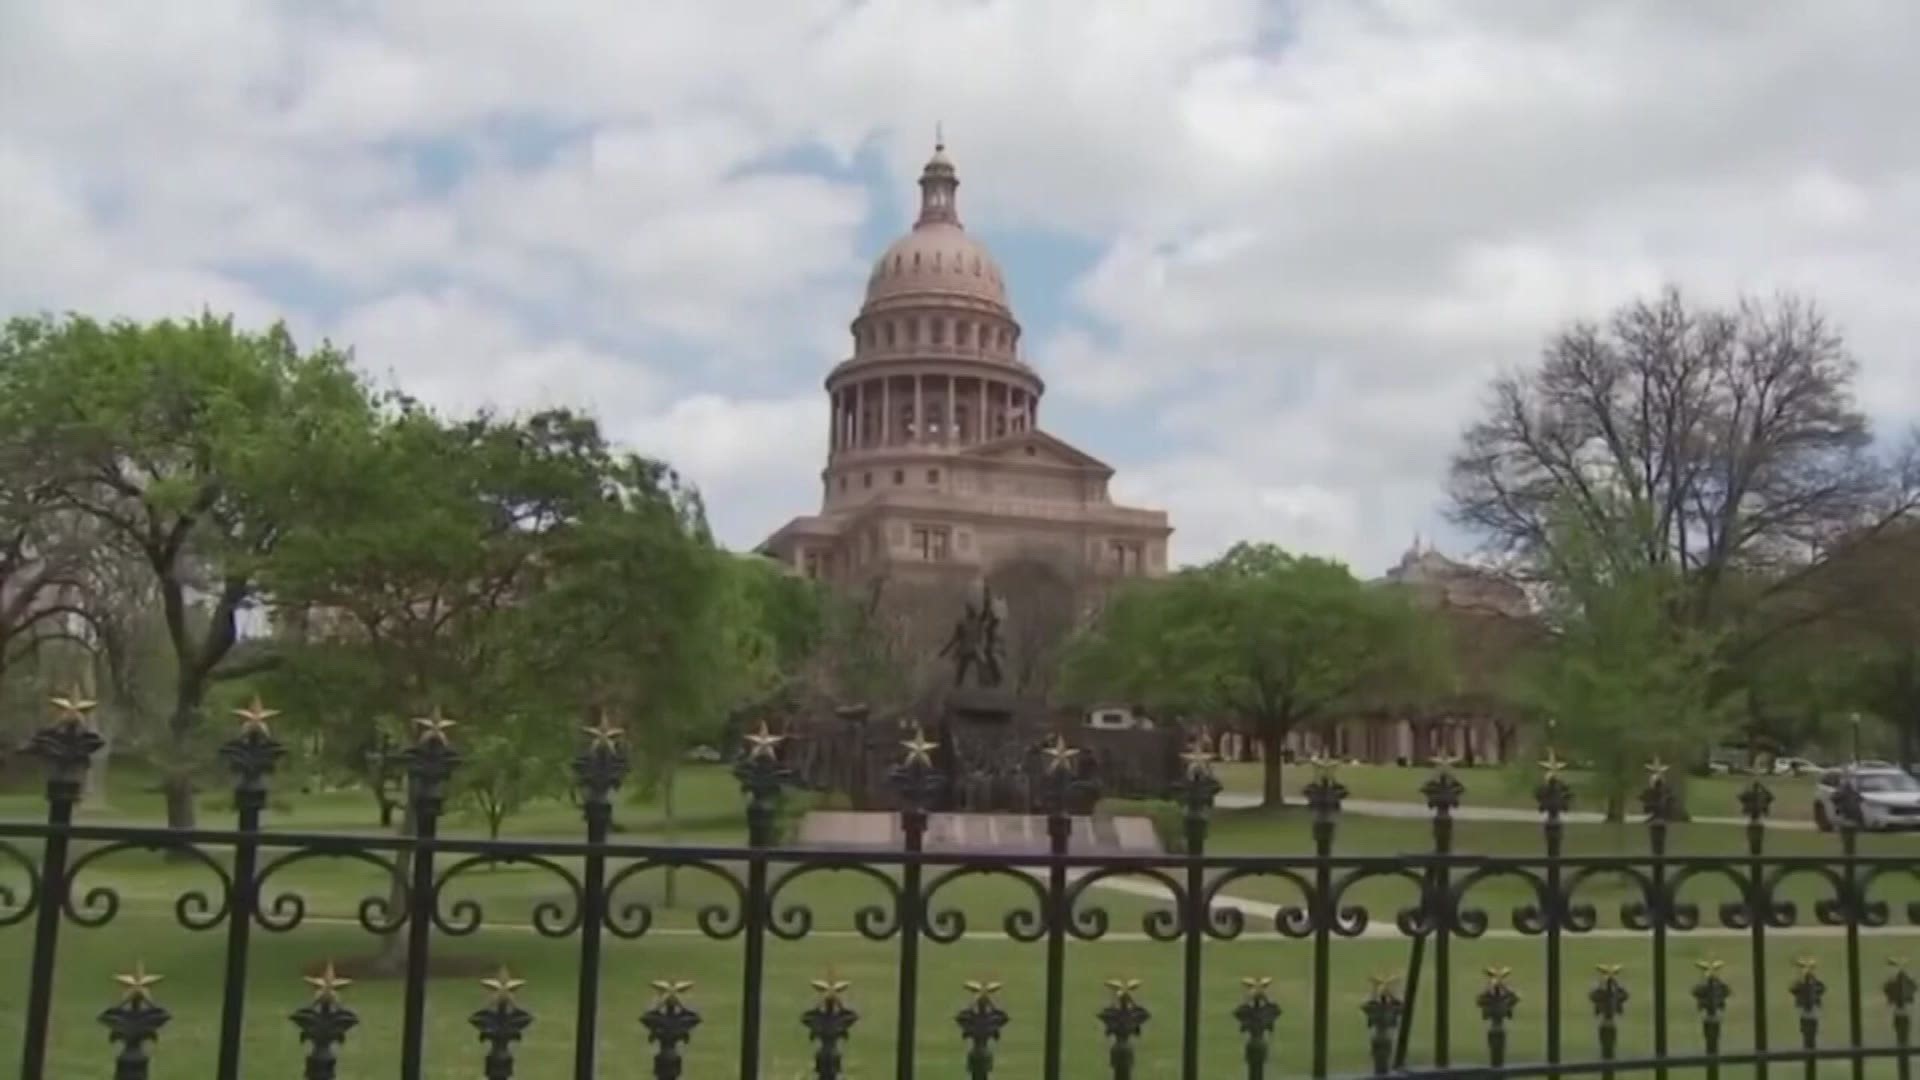 Texas Democrats on Monday bolted for Washington, D.C., and said they were ready to remain there for weeks in a revolt against a GOP overhaul of election laws.